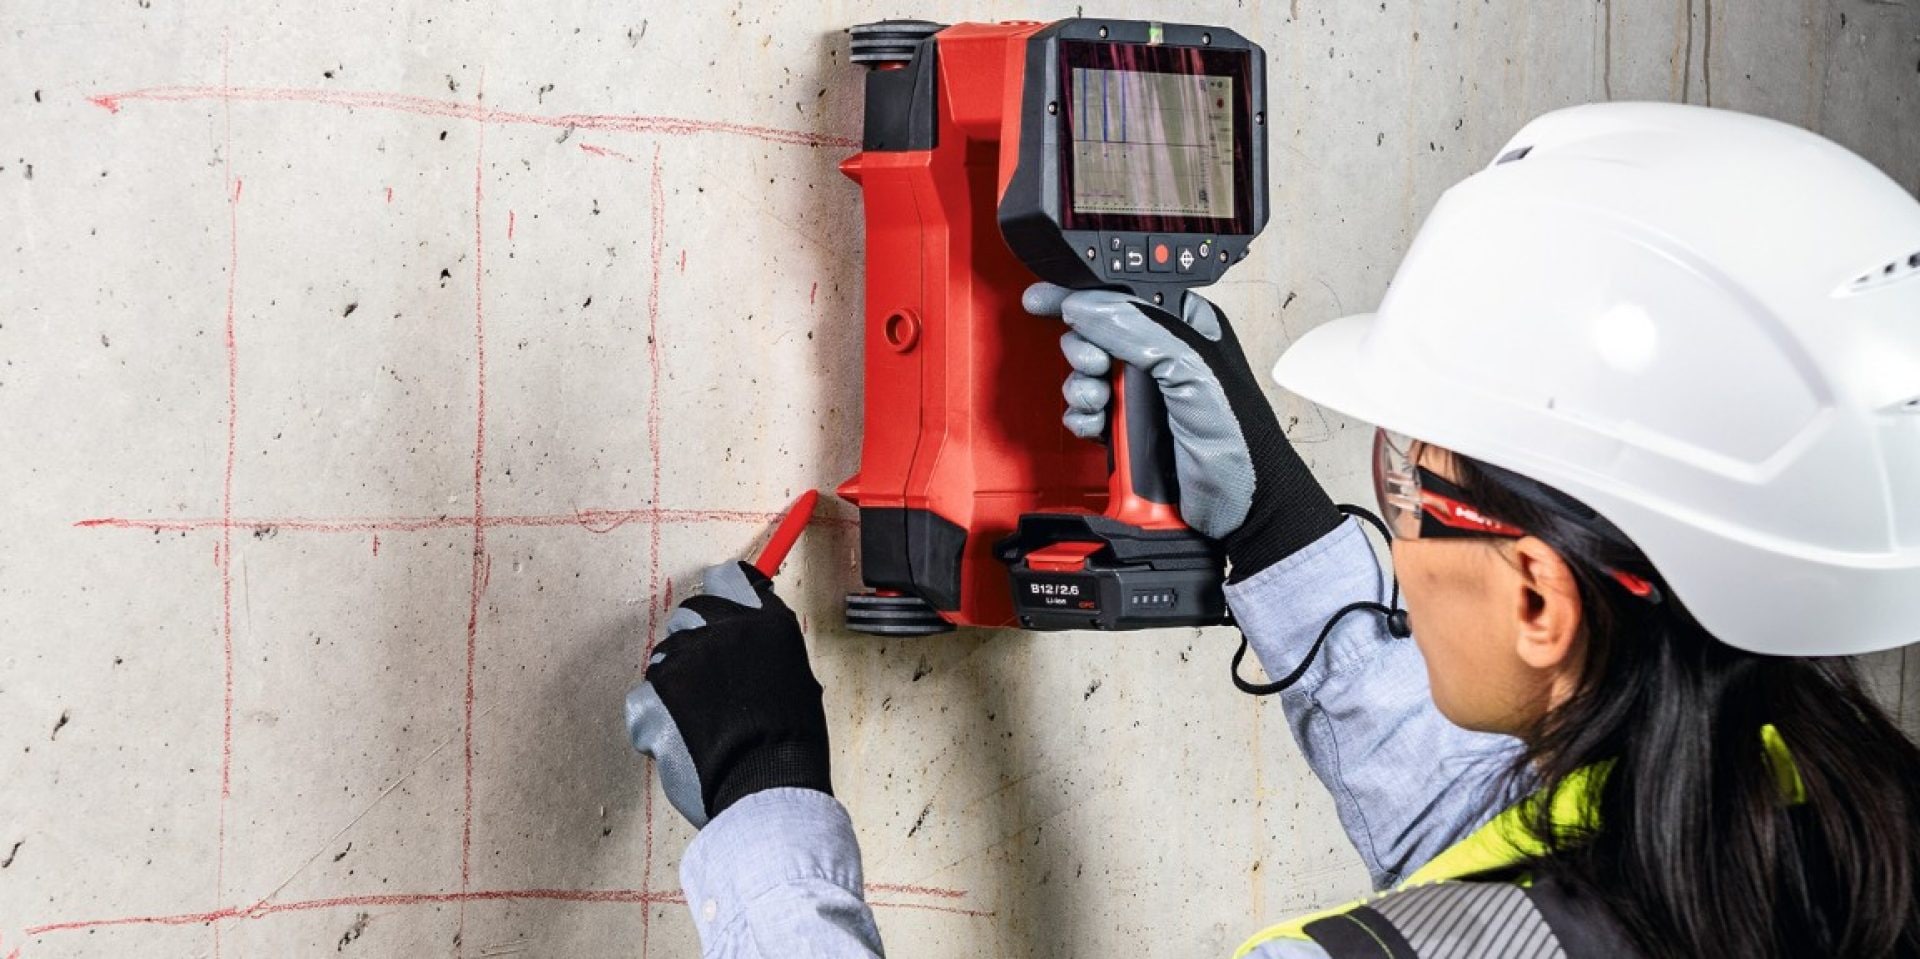 Buyer's guide to selecting the best concrete scanning tool for engineering, rebar location, general contractors and hit avoidance